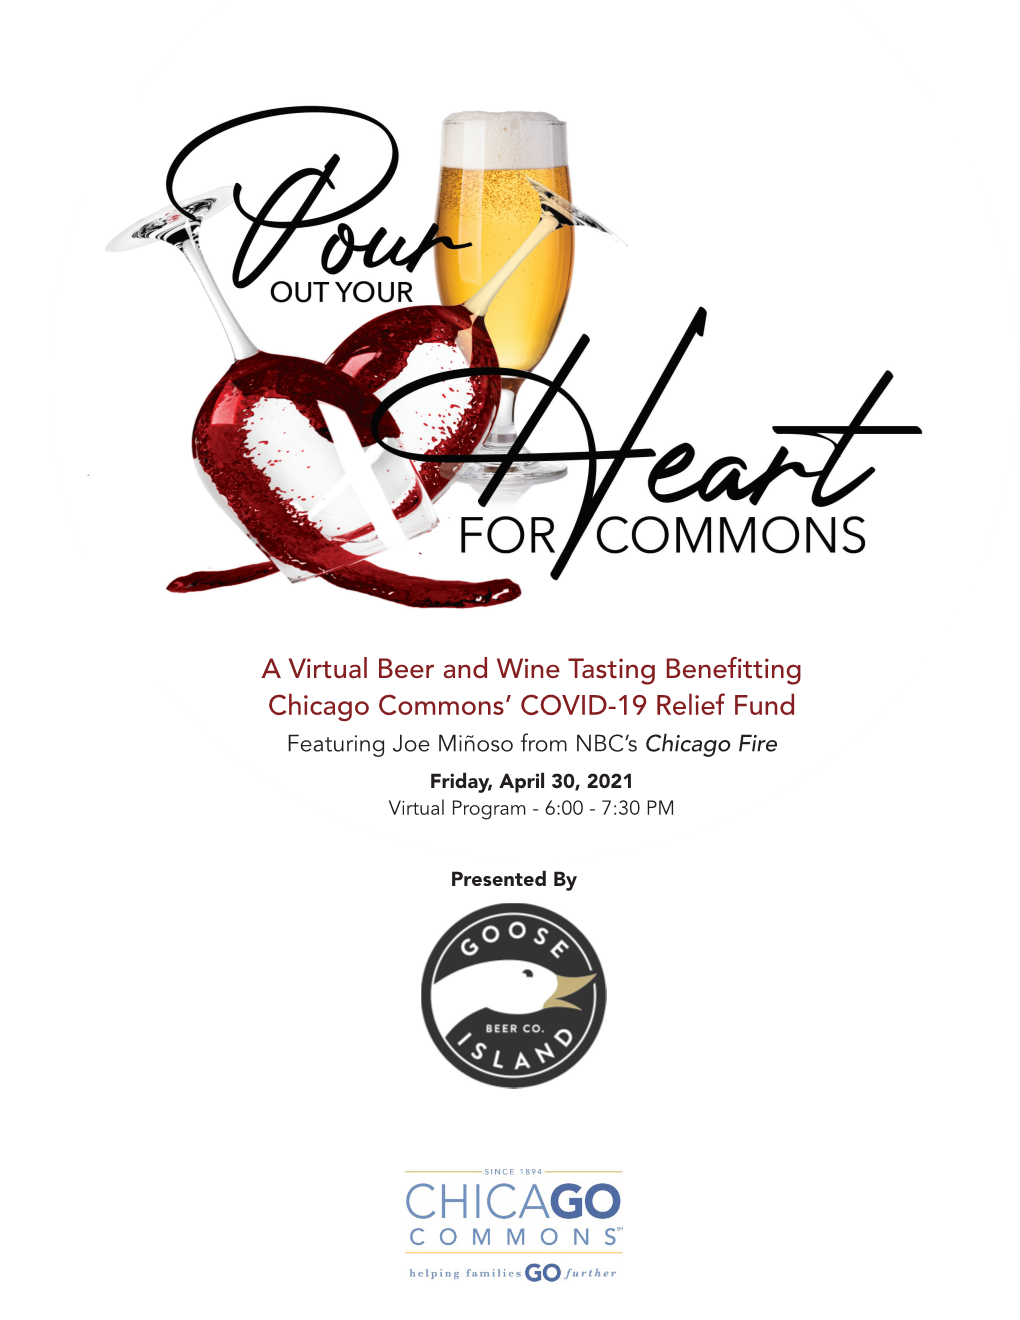 A Virtual Beer and Wine Tasting Benefitting Chicago Commons